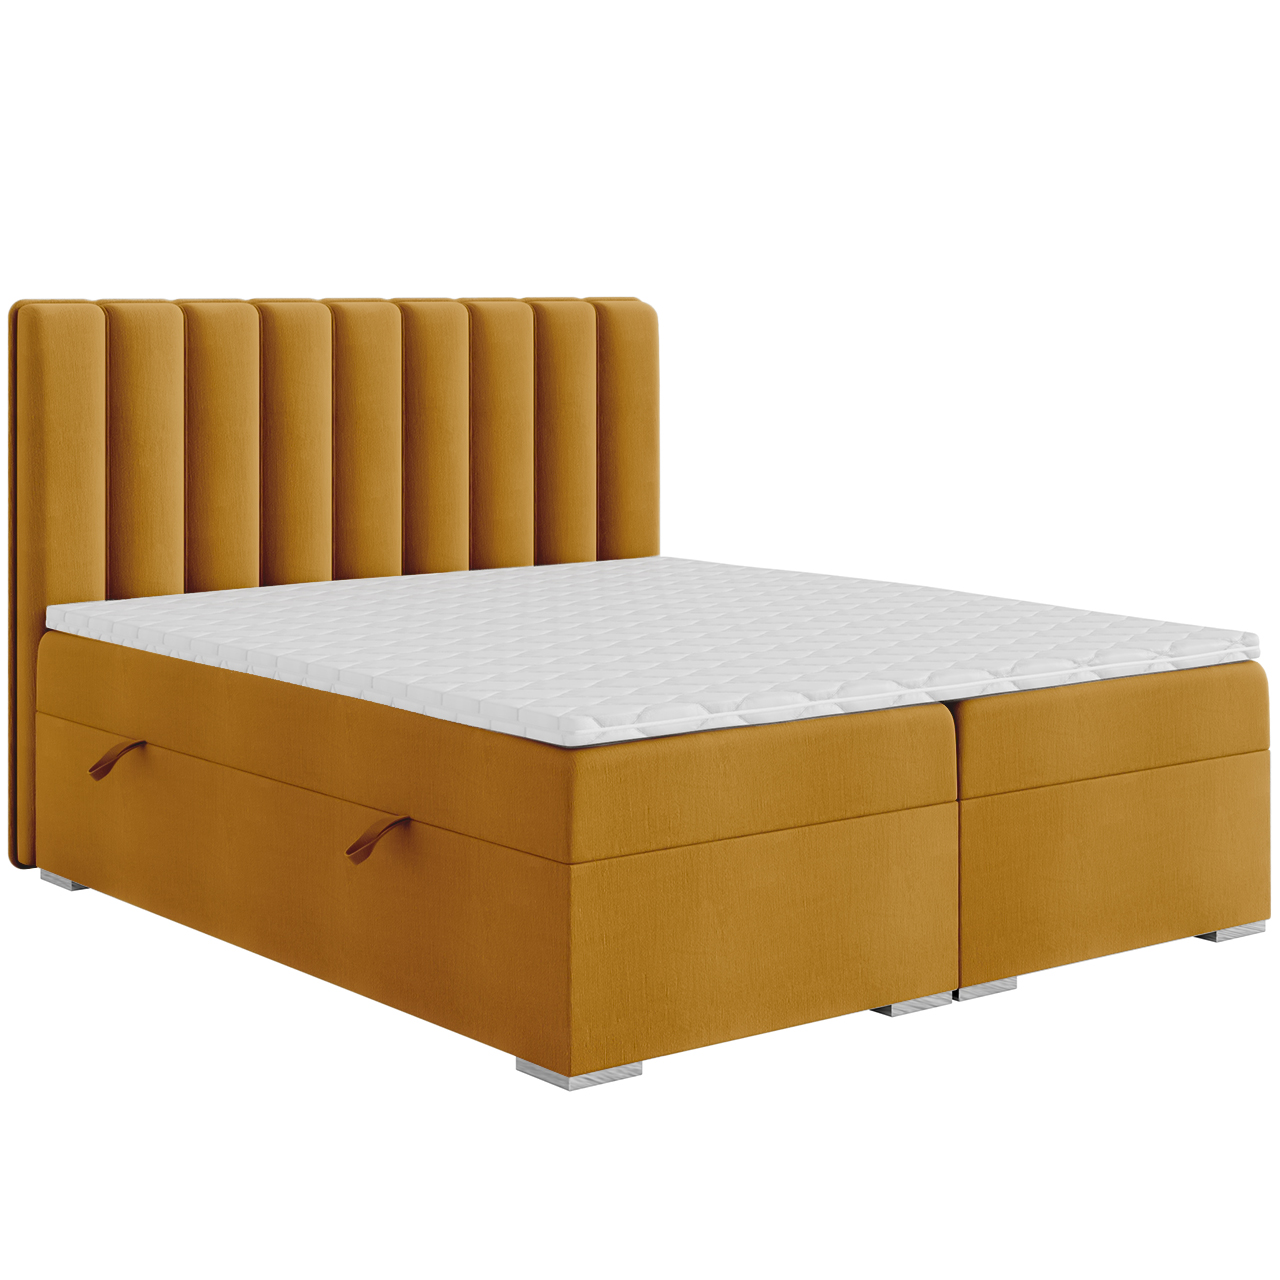 Upholstered bed FALON 160x200 riviera 41